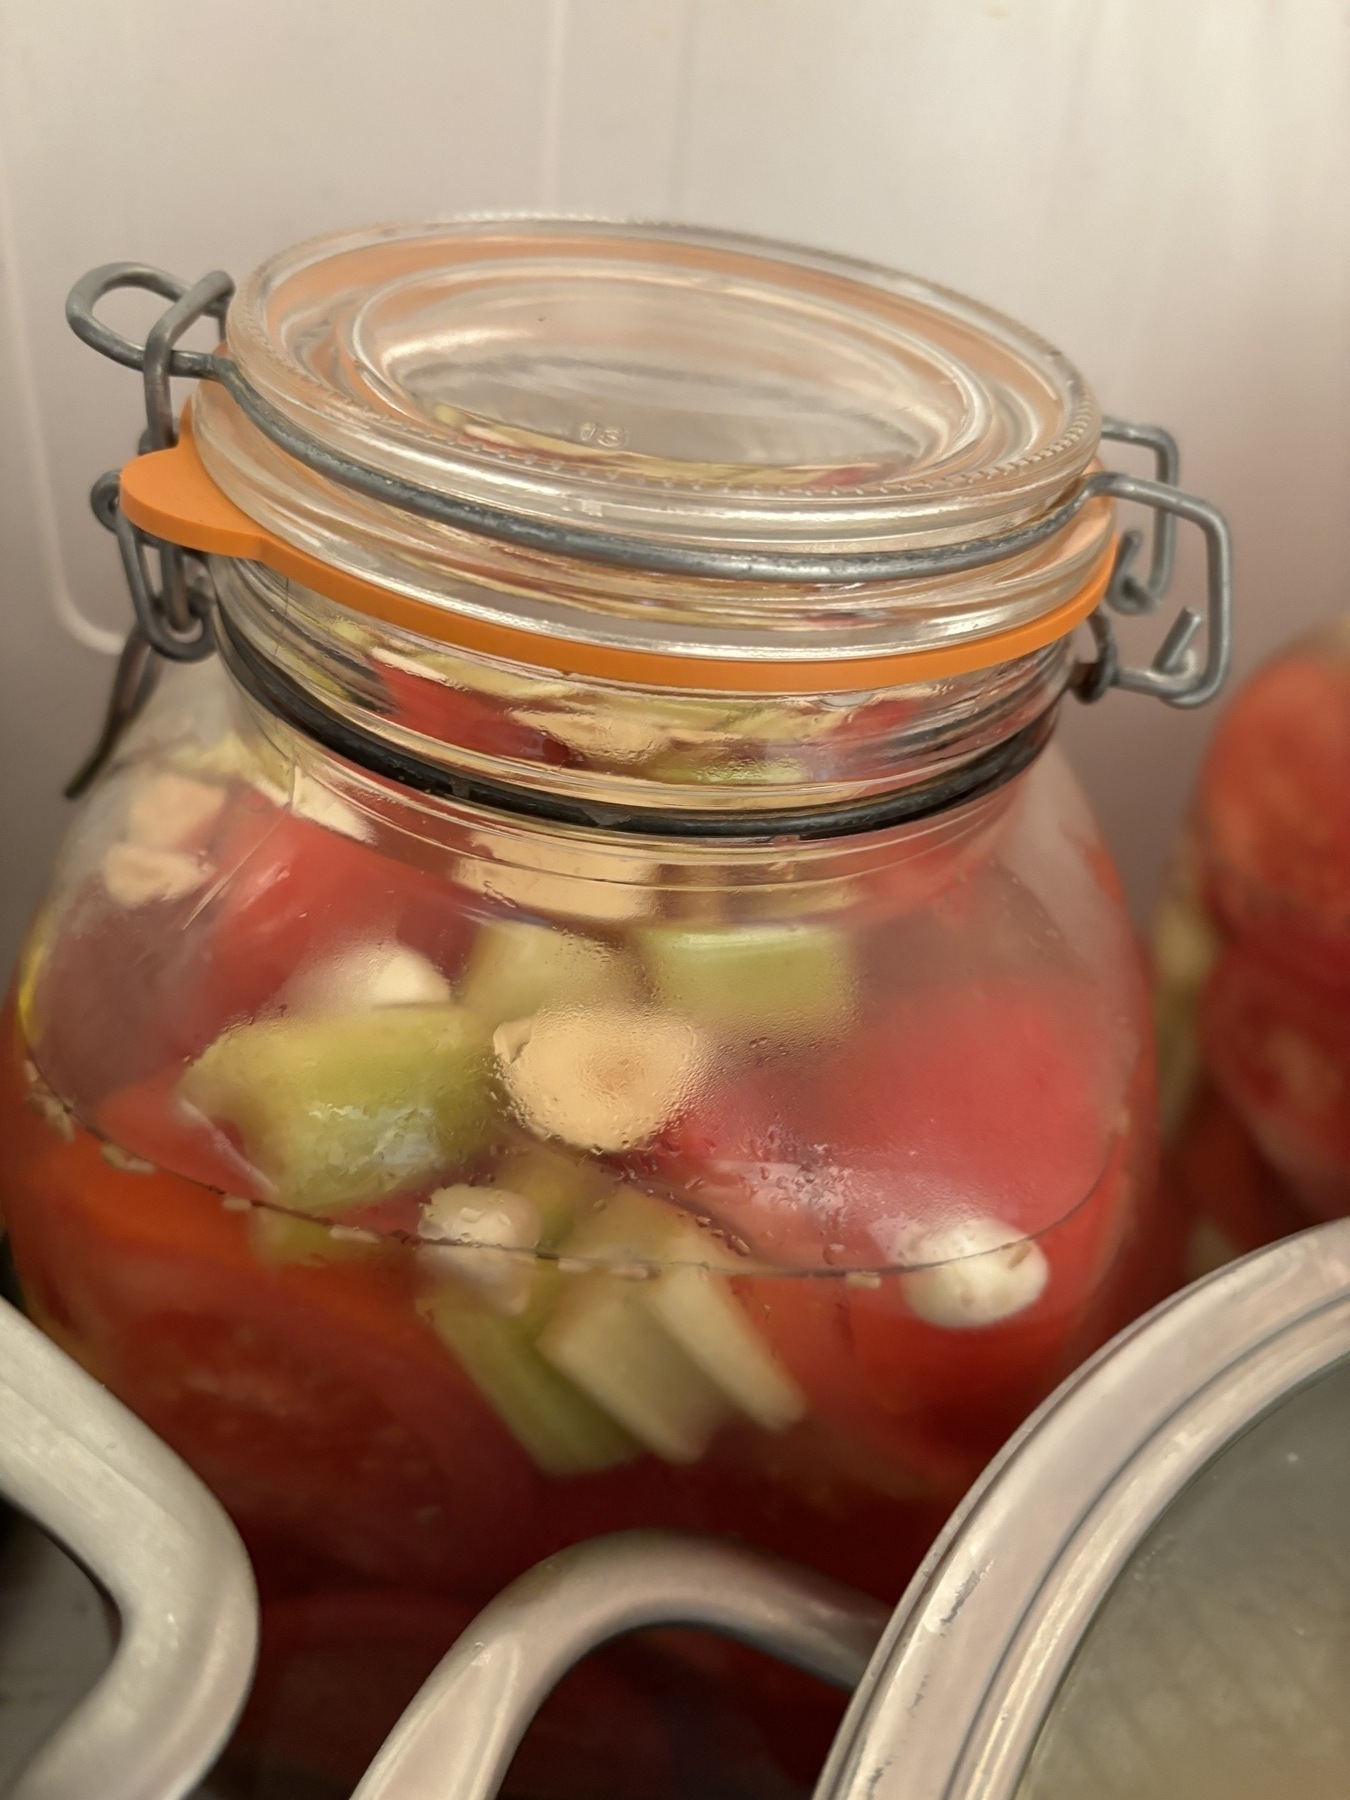 A jar filled with pickled red tomatoes, including celery and garlic cloves, is seen sealed and stored in a refrigerator